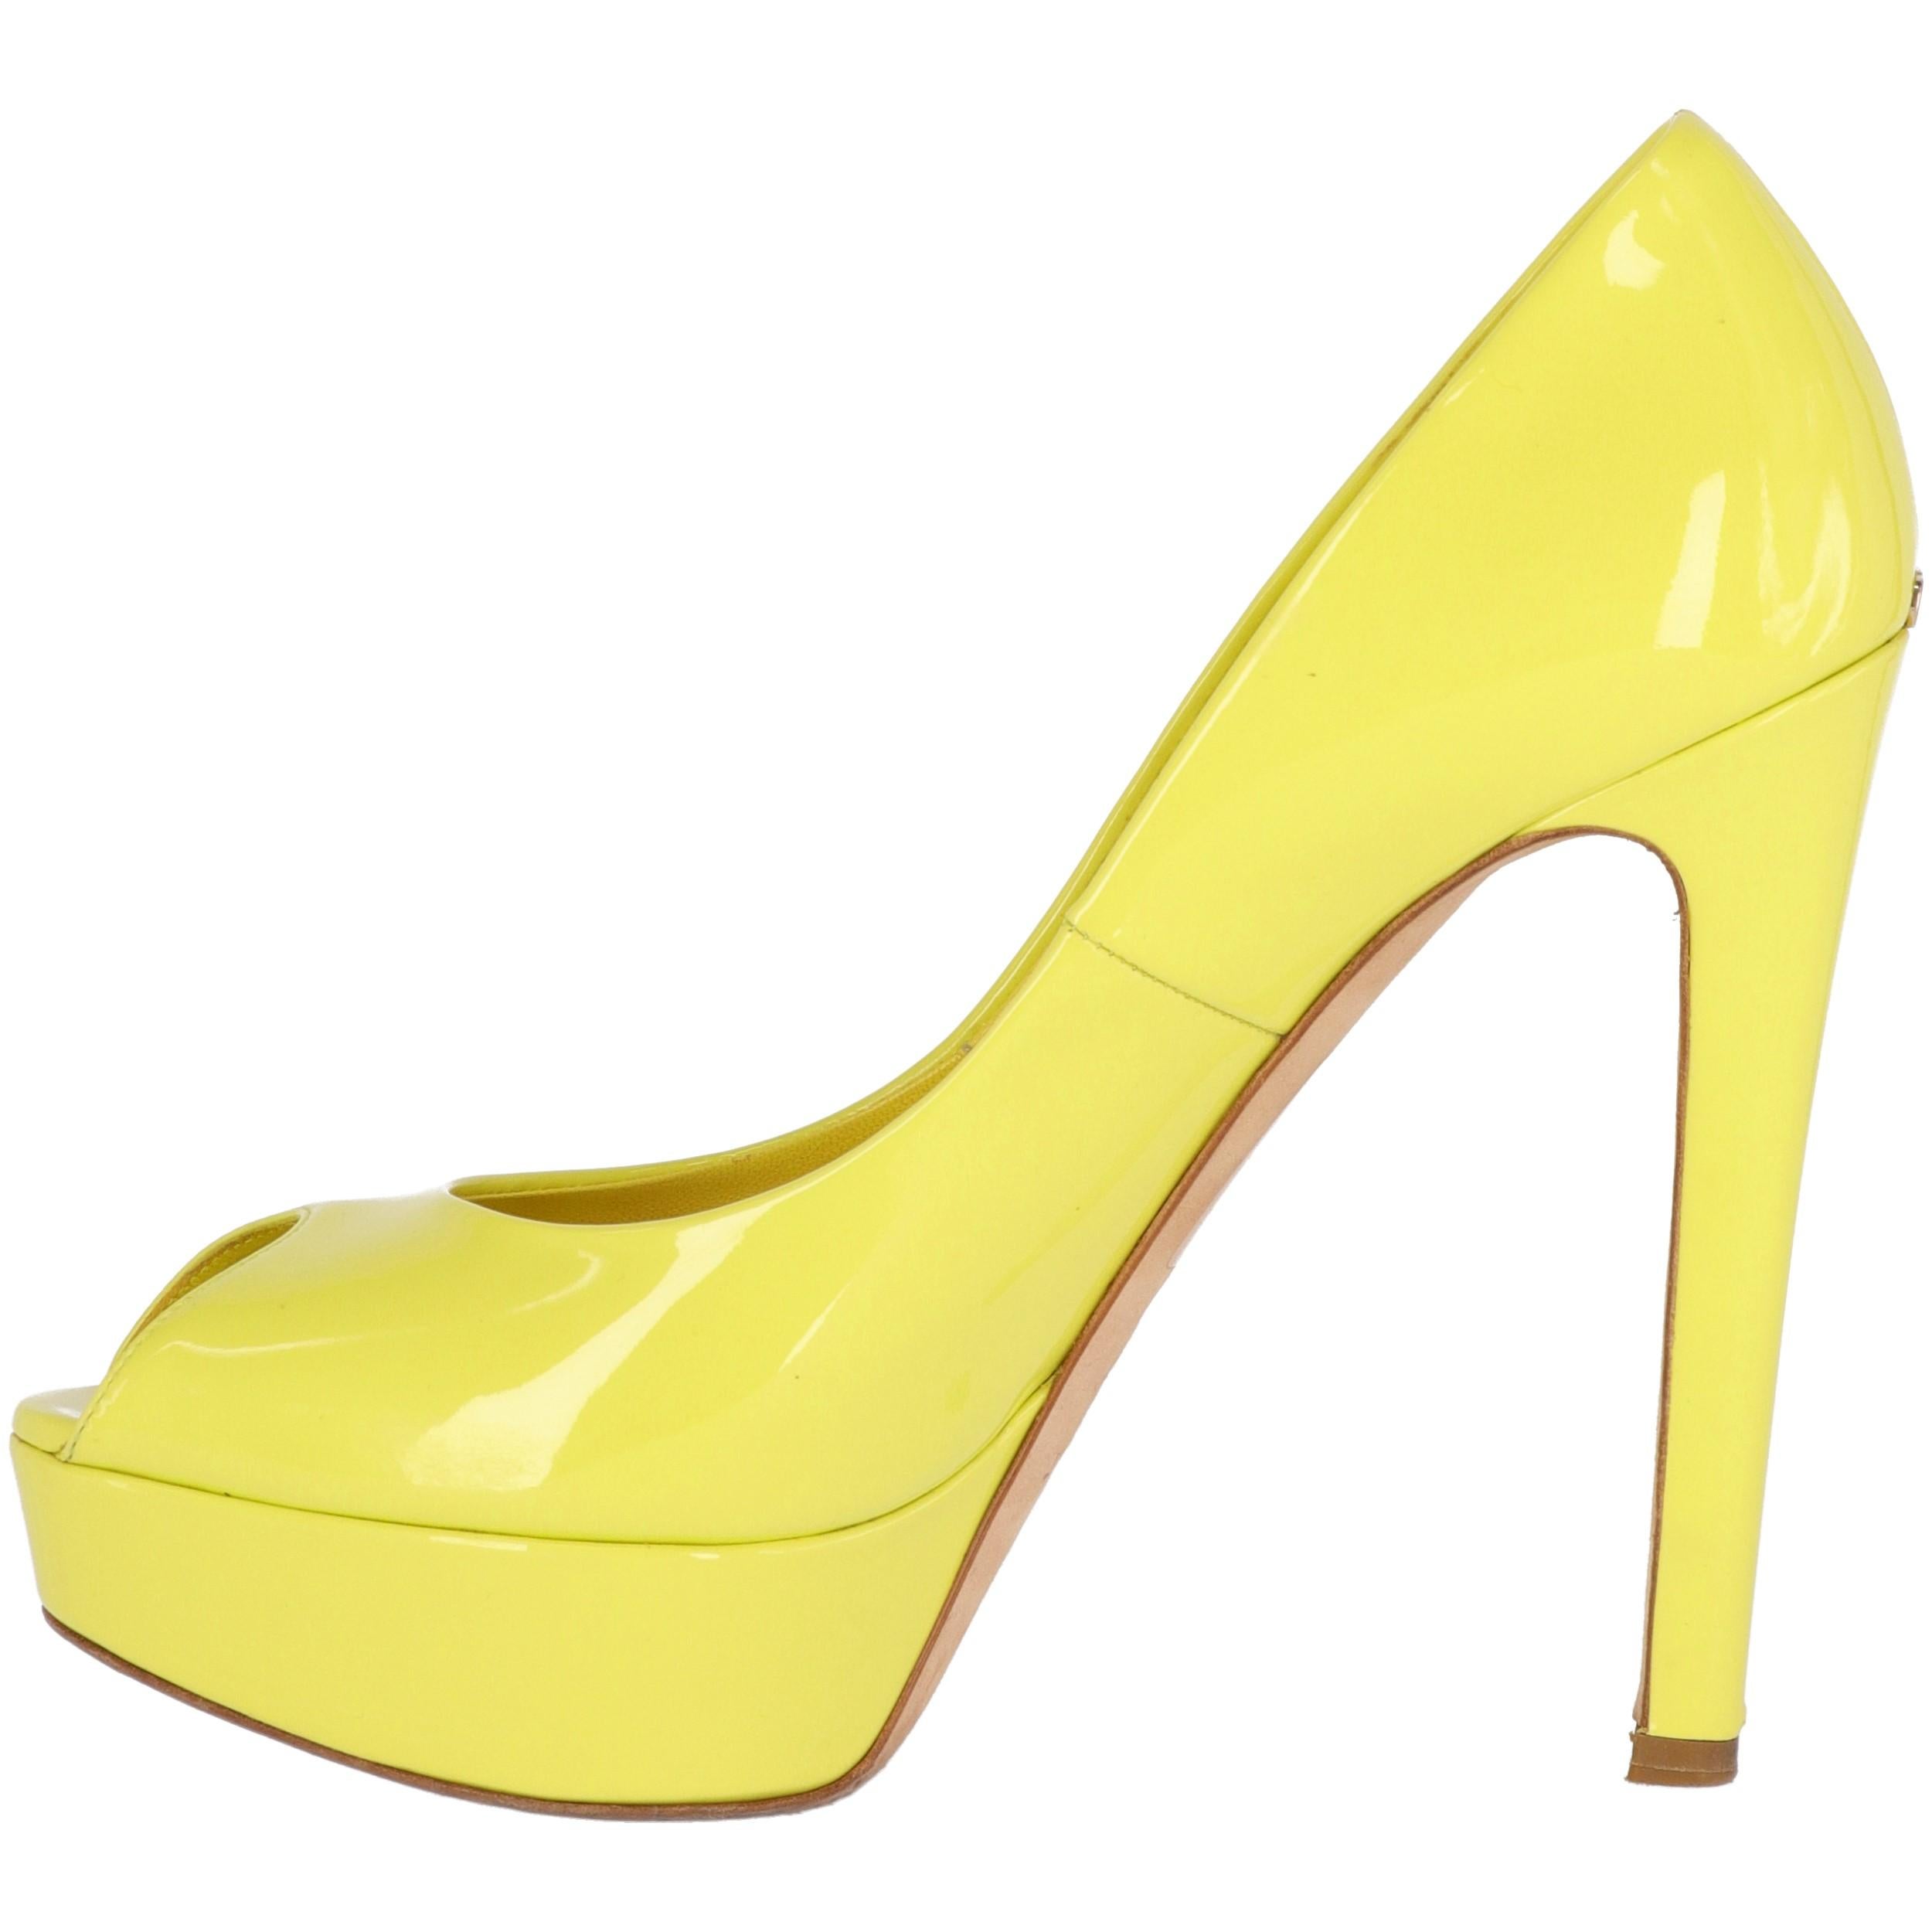 Dior heeled shoes in yellow lemon patent leather, with open toes, plateau, 13 cm heels, and golden metal 